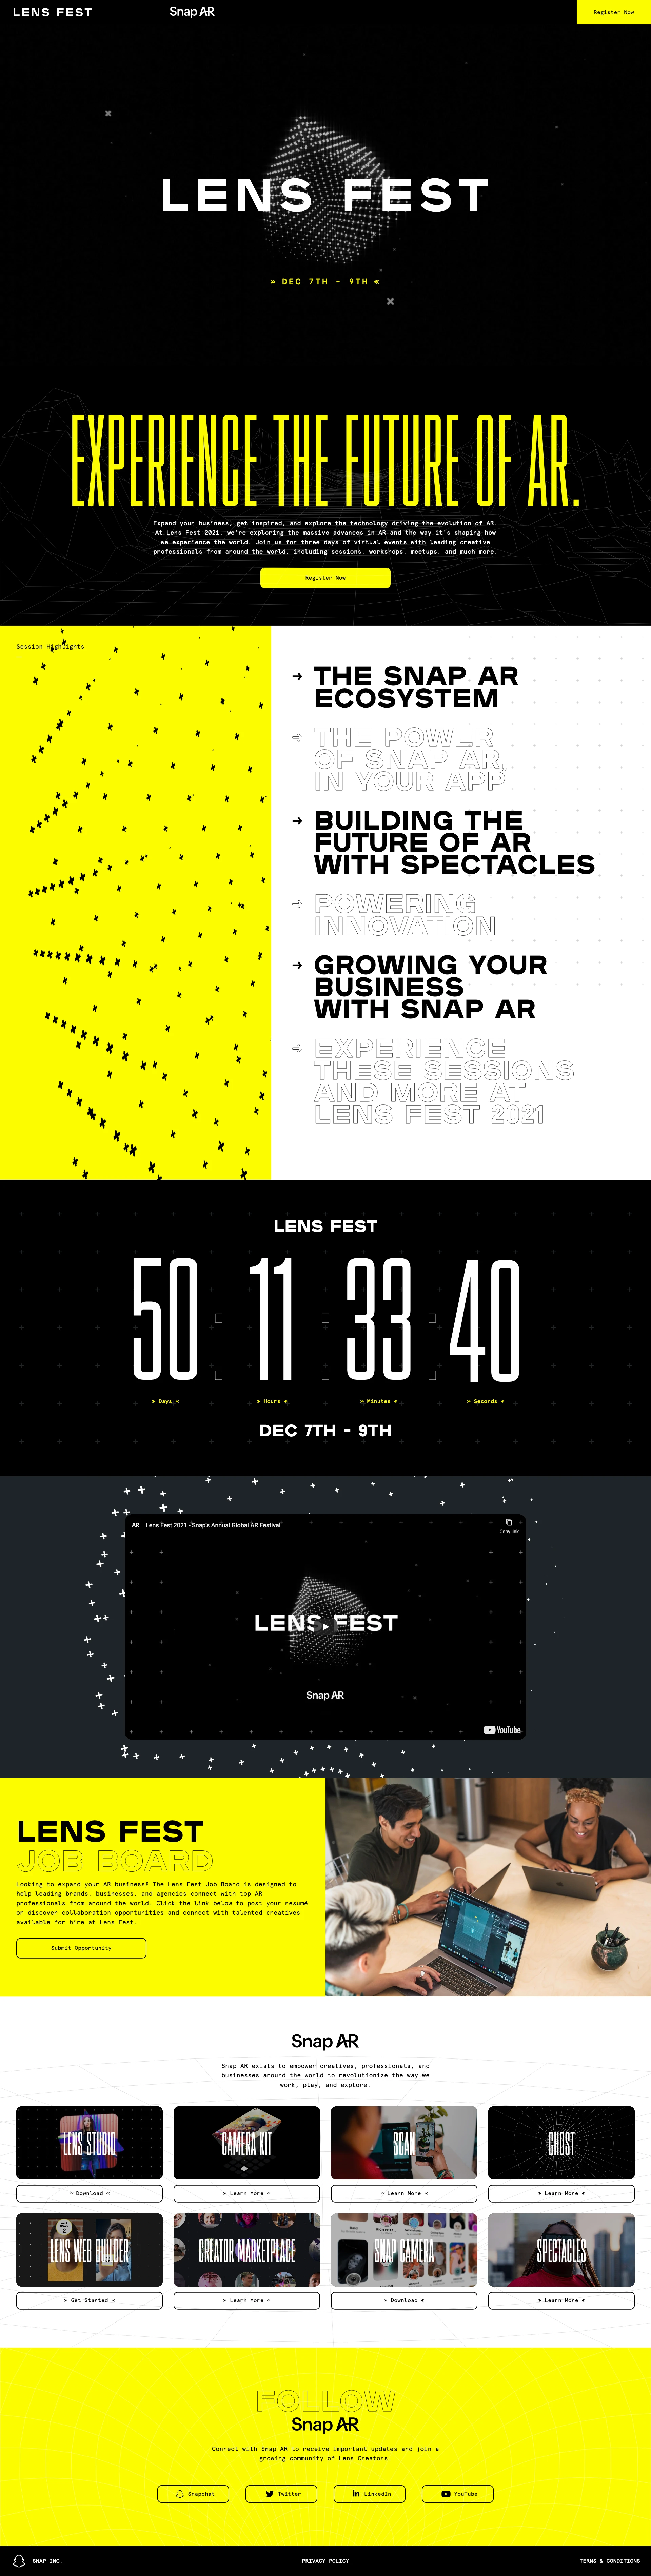 Lens Fest Landing Page Example: Experience the Future of AR. Expand your business, get inspired, and explore the technology driving the evolution of AR. At Lens Fest 2021, we’re exploring the massive advances in AR and the way it's shaping how we experience the world. Join us for three days of virtual events with leading creative professionals from around the world, including sessions, workshops, meetups, and much more.